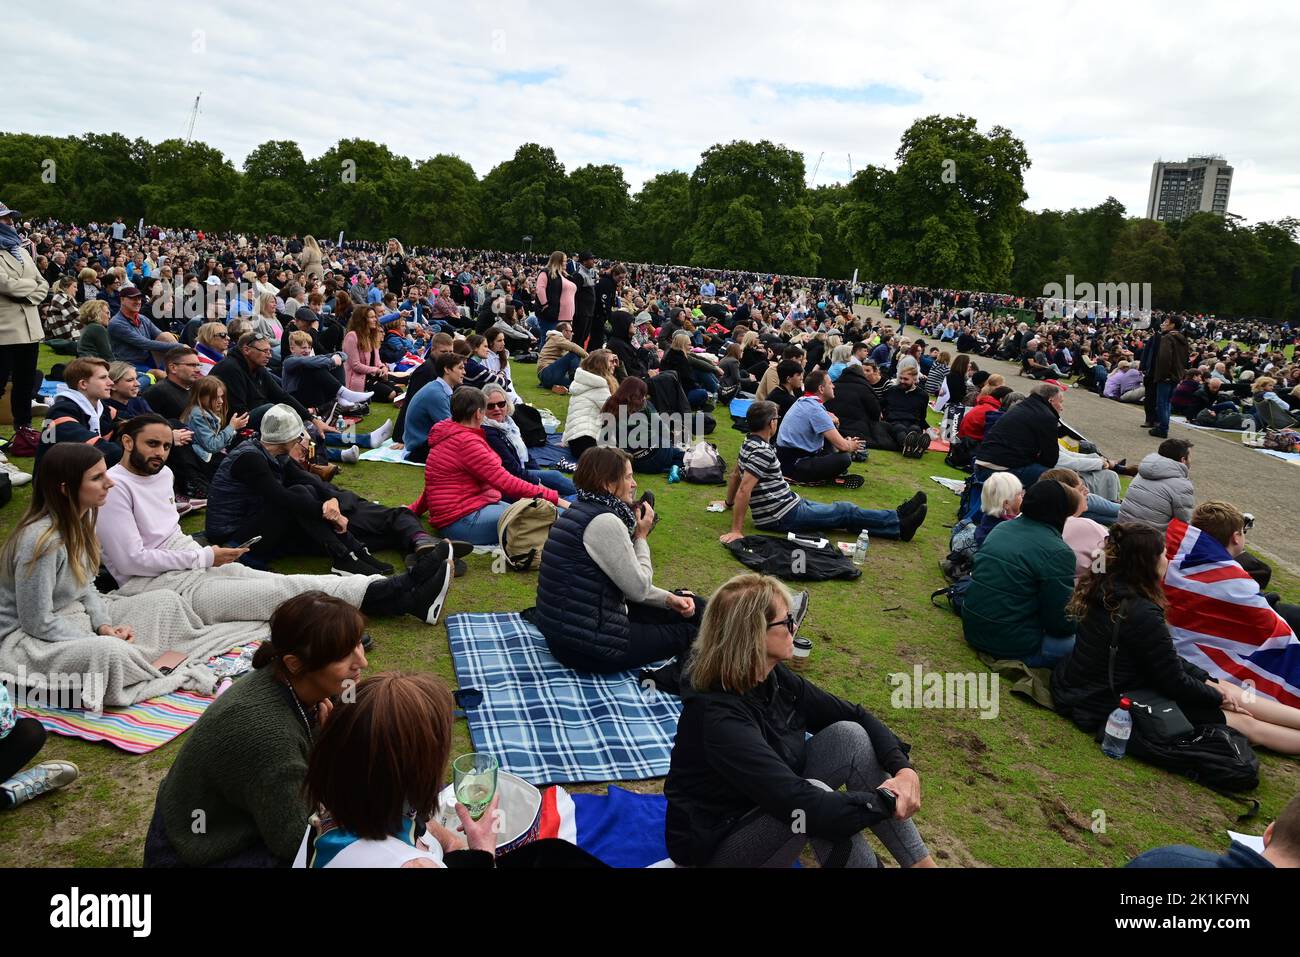 State funeral of Her Majesty Queen Elizabeth II, London, UK, Monday 19th September 2022. Crowds of people gathered in Hyde park watching the ceremony on big screens. Stock Photo